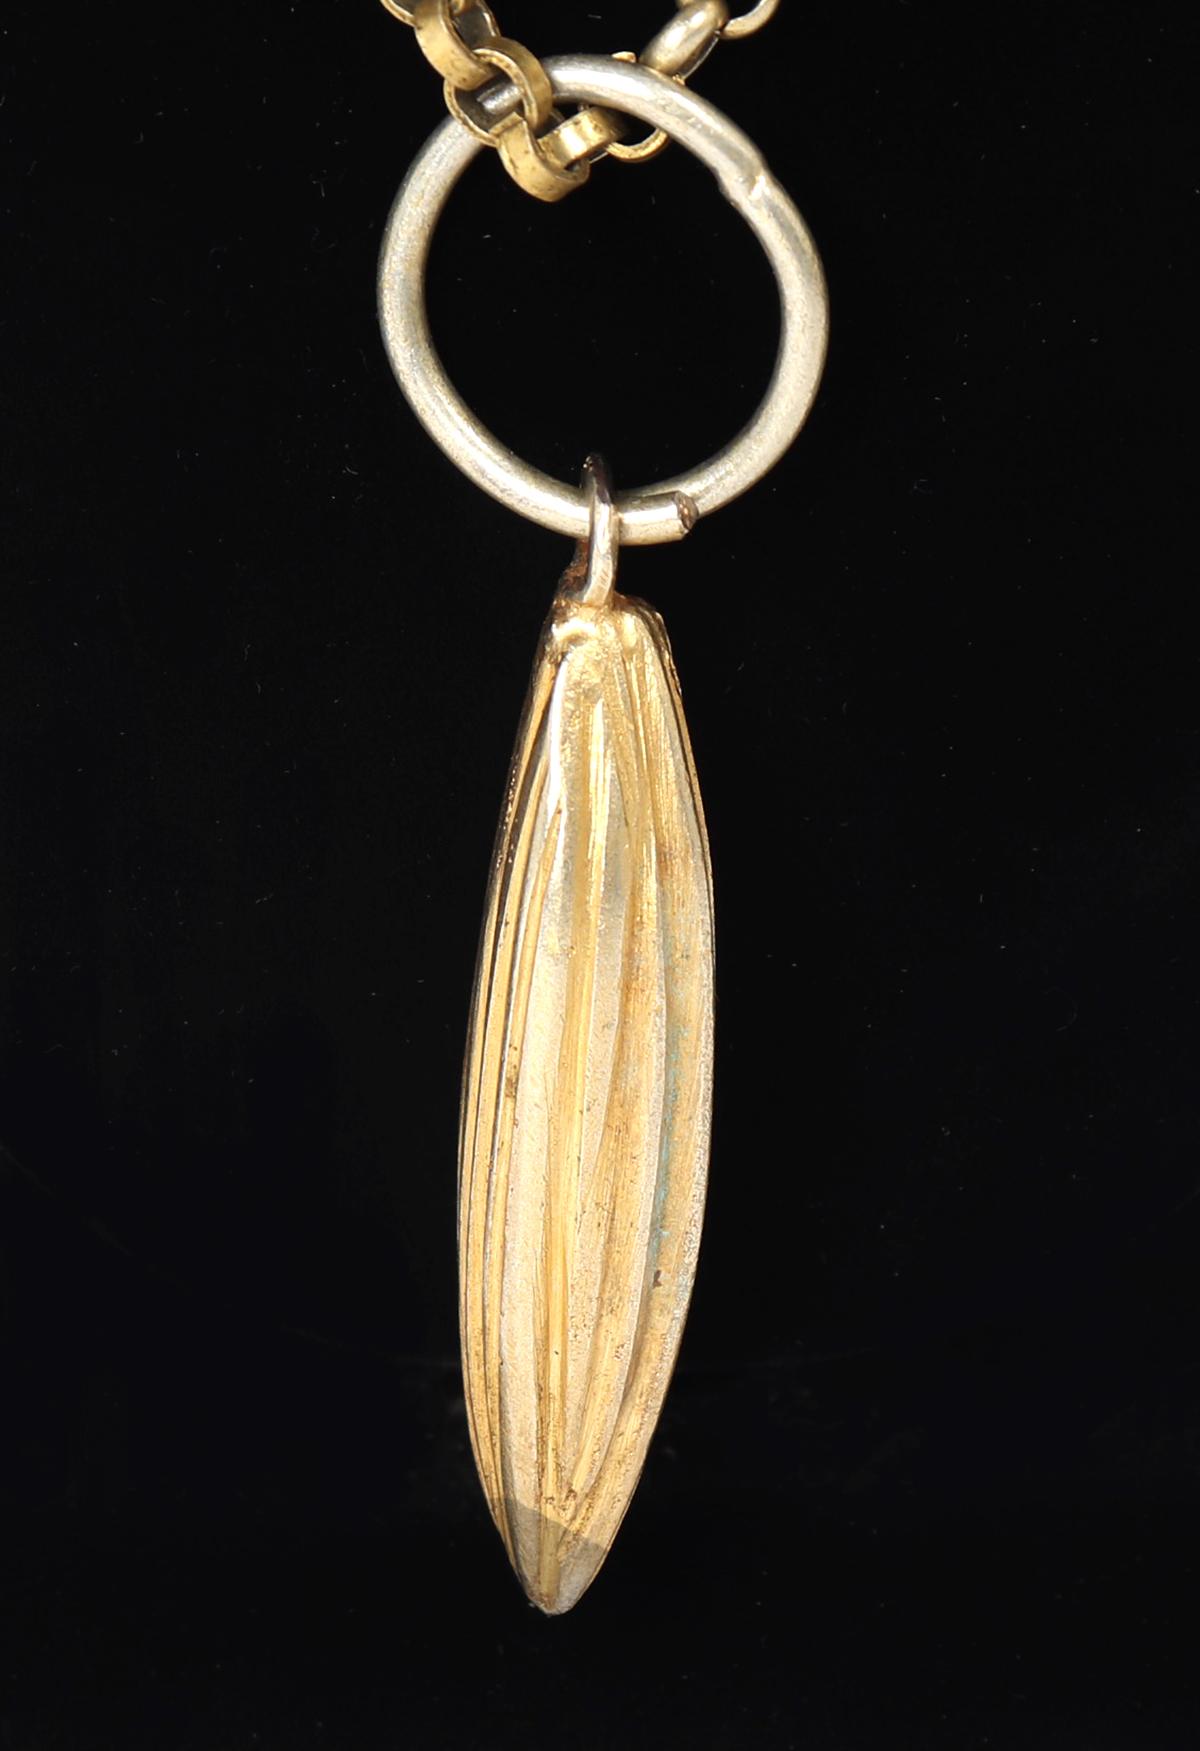 Akan Gold Seed Pendant with Chain